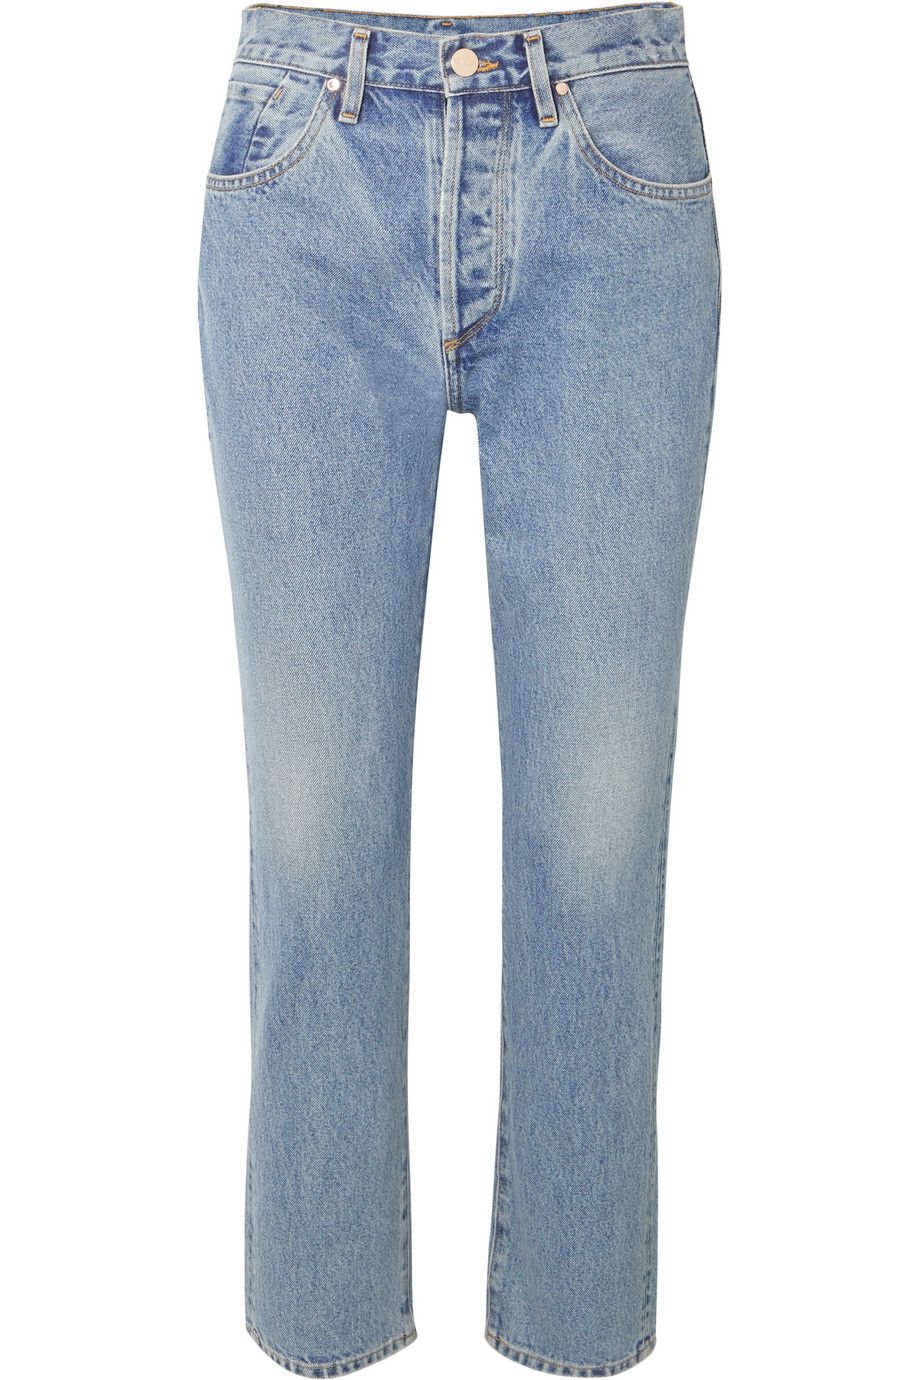 Shop Best Mom Jeans - Mom Jeans At Every Price Point